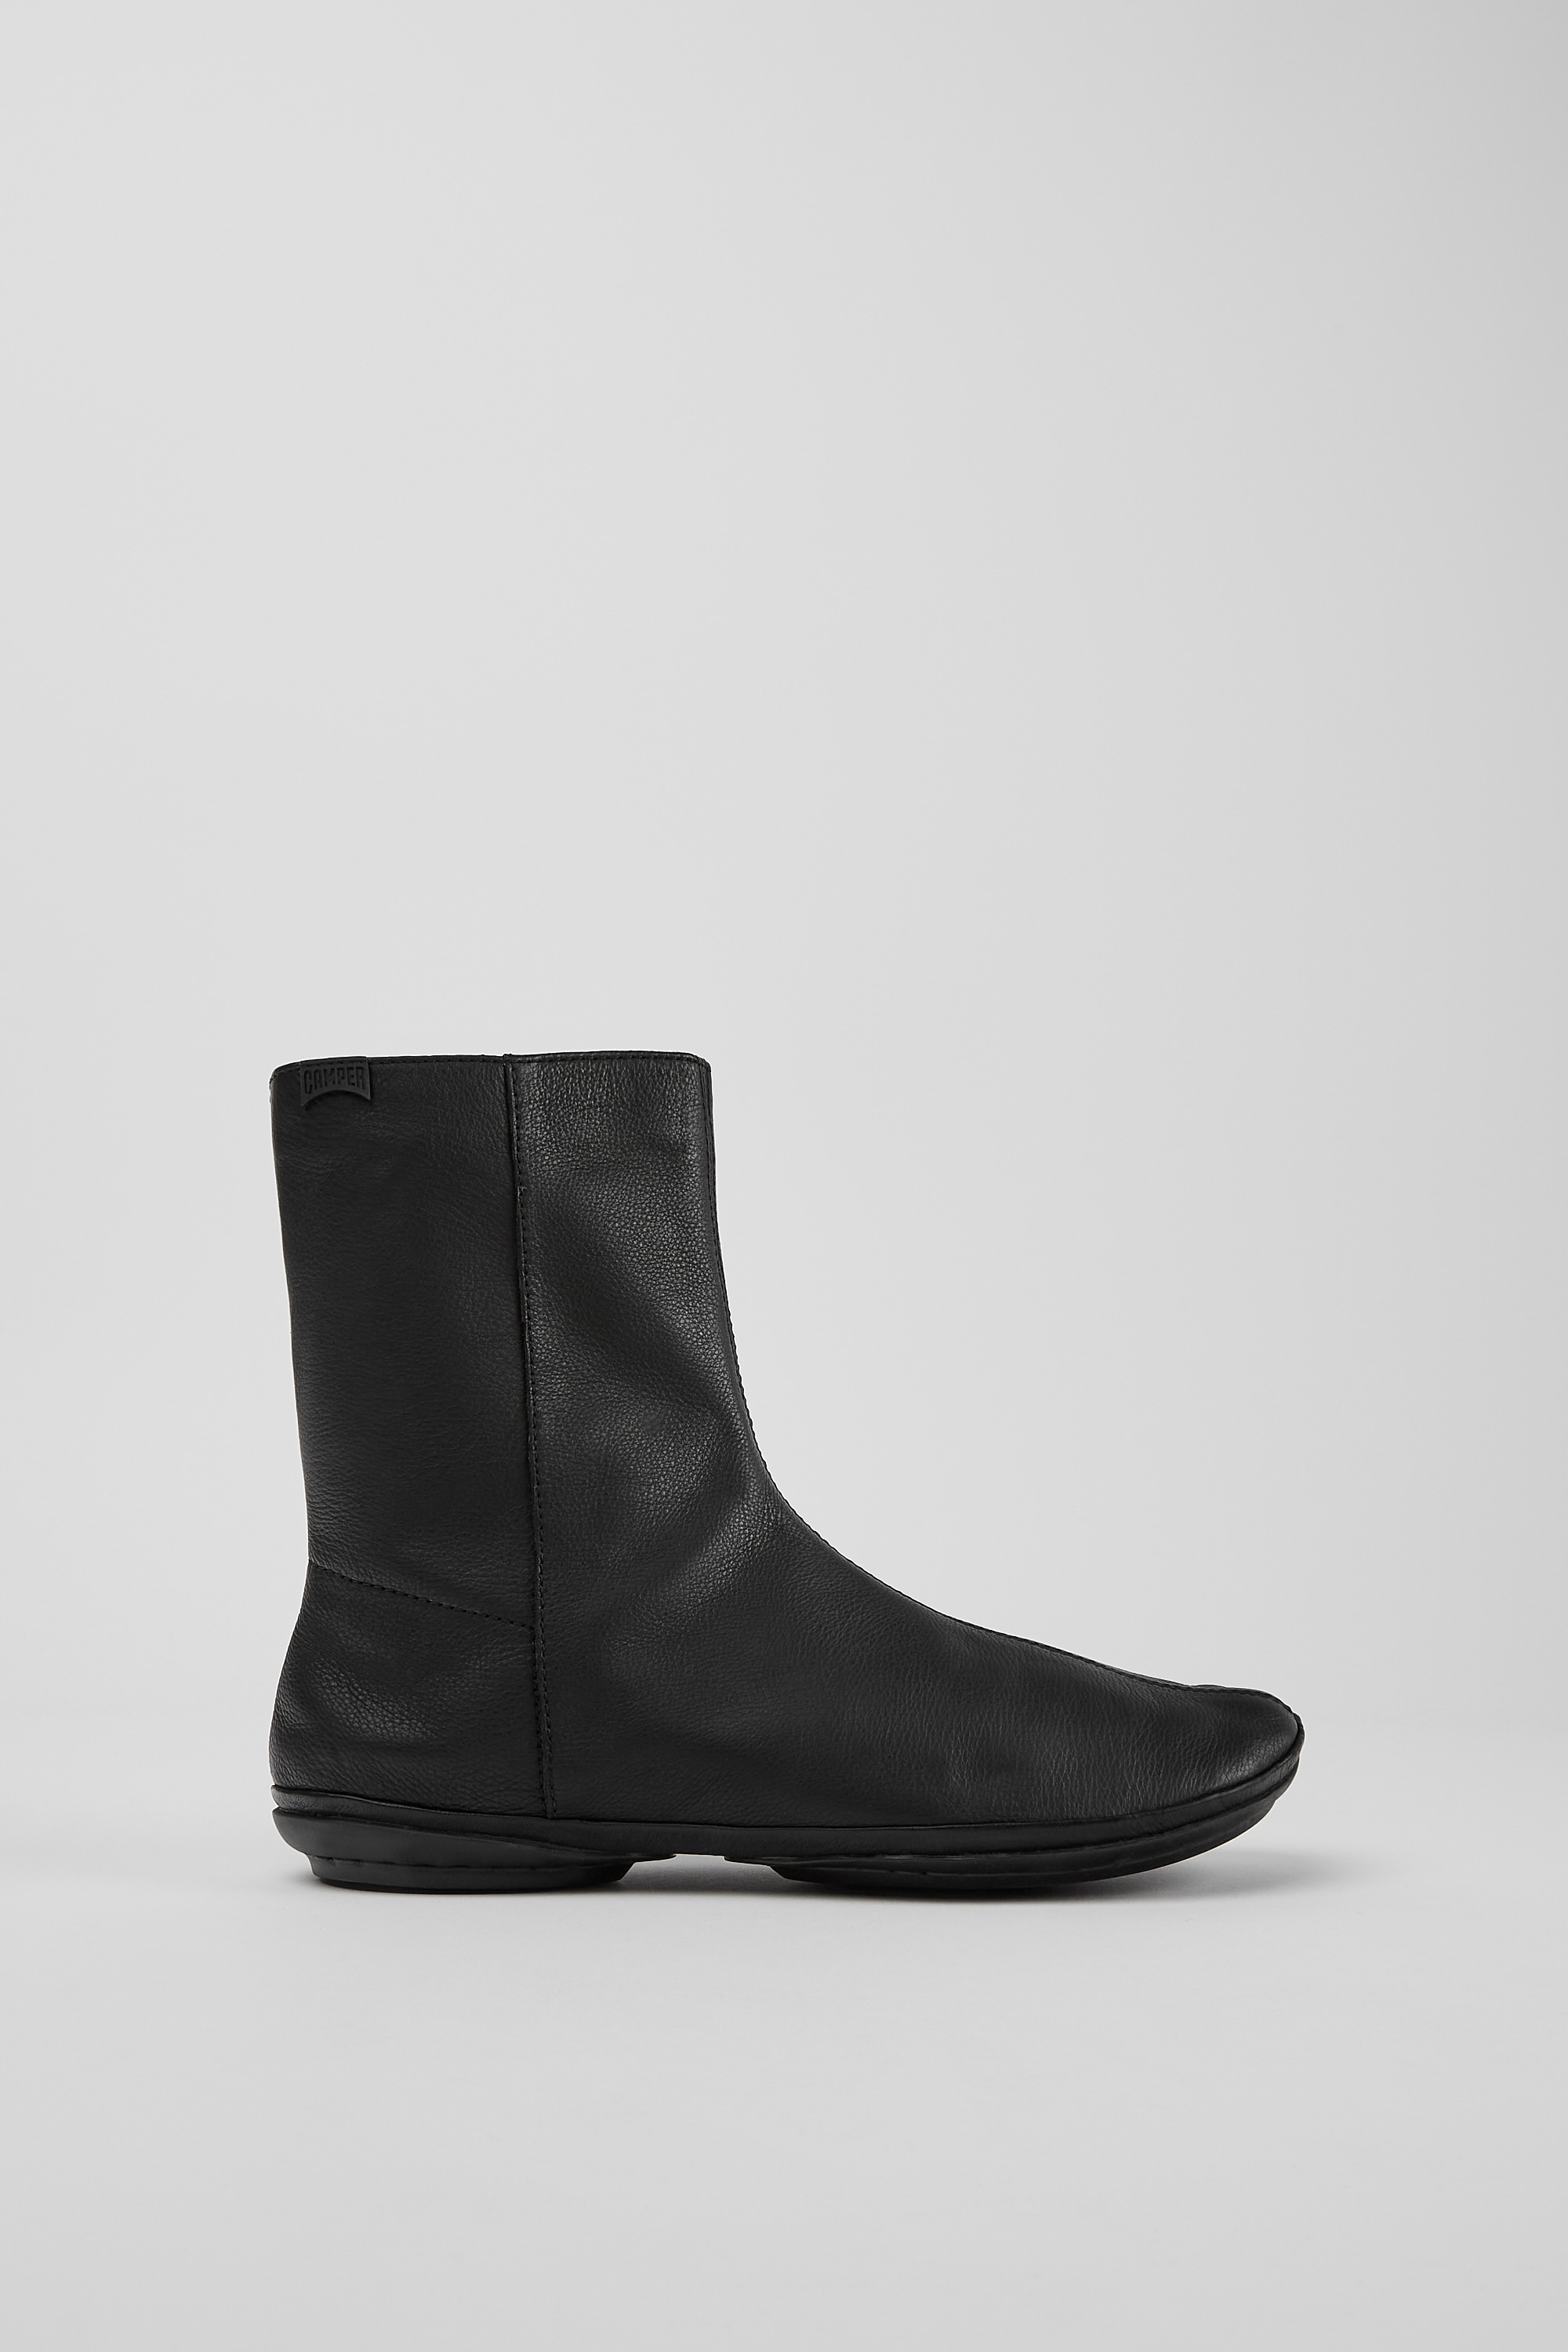 Right Boots for Spring/Summer collection Camper Bolivia